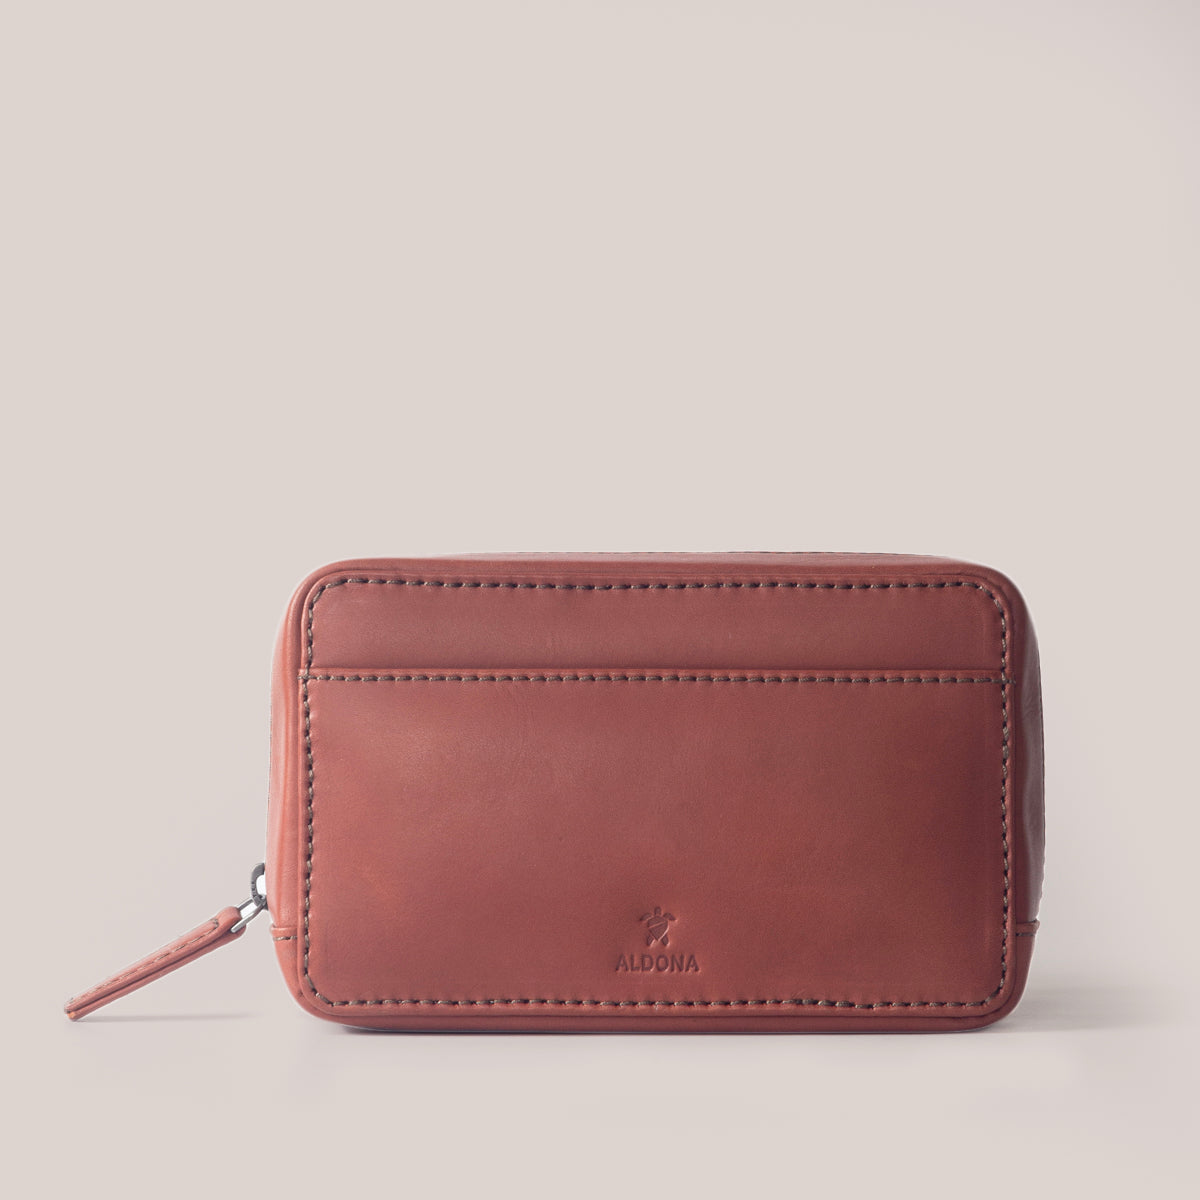 Small leather accessories